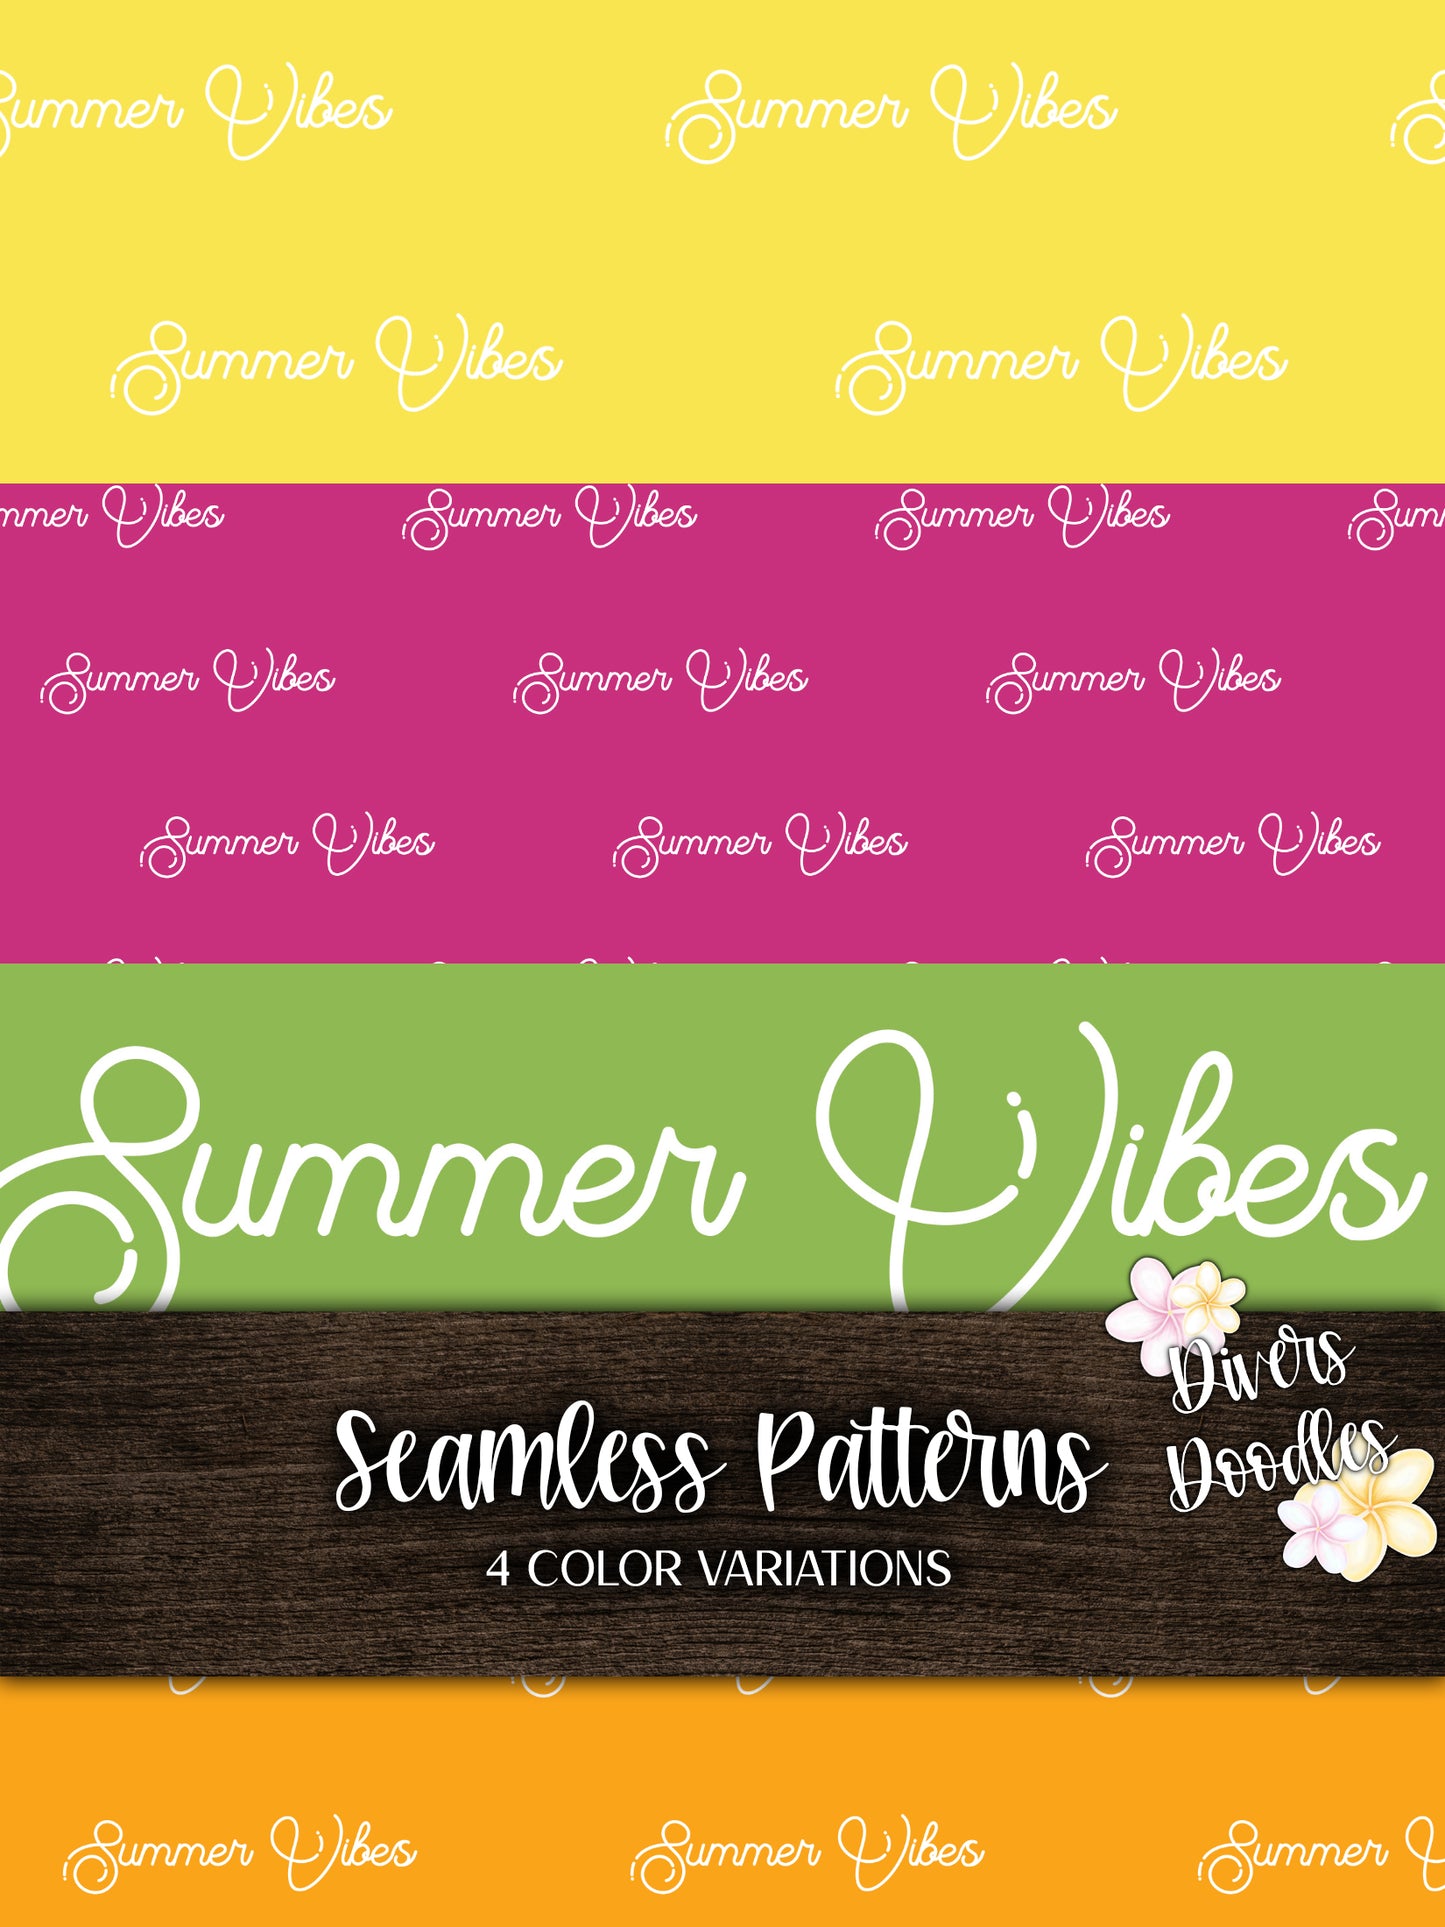 Summer Vibes Seamless Pattern for Tumblers, Summer Digital Paper for Scrapbooking, Bright Seamless File, Retro Seamless Designs